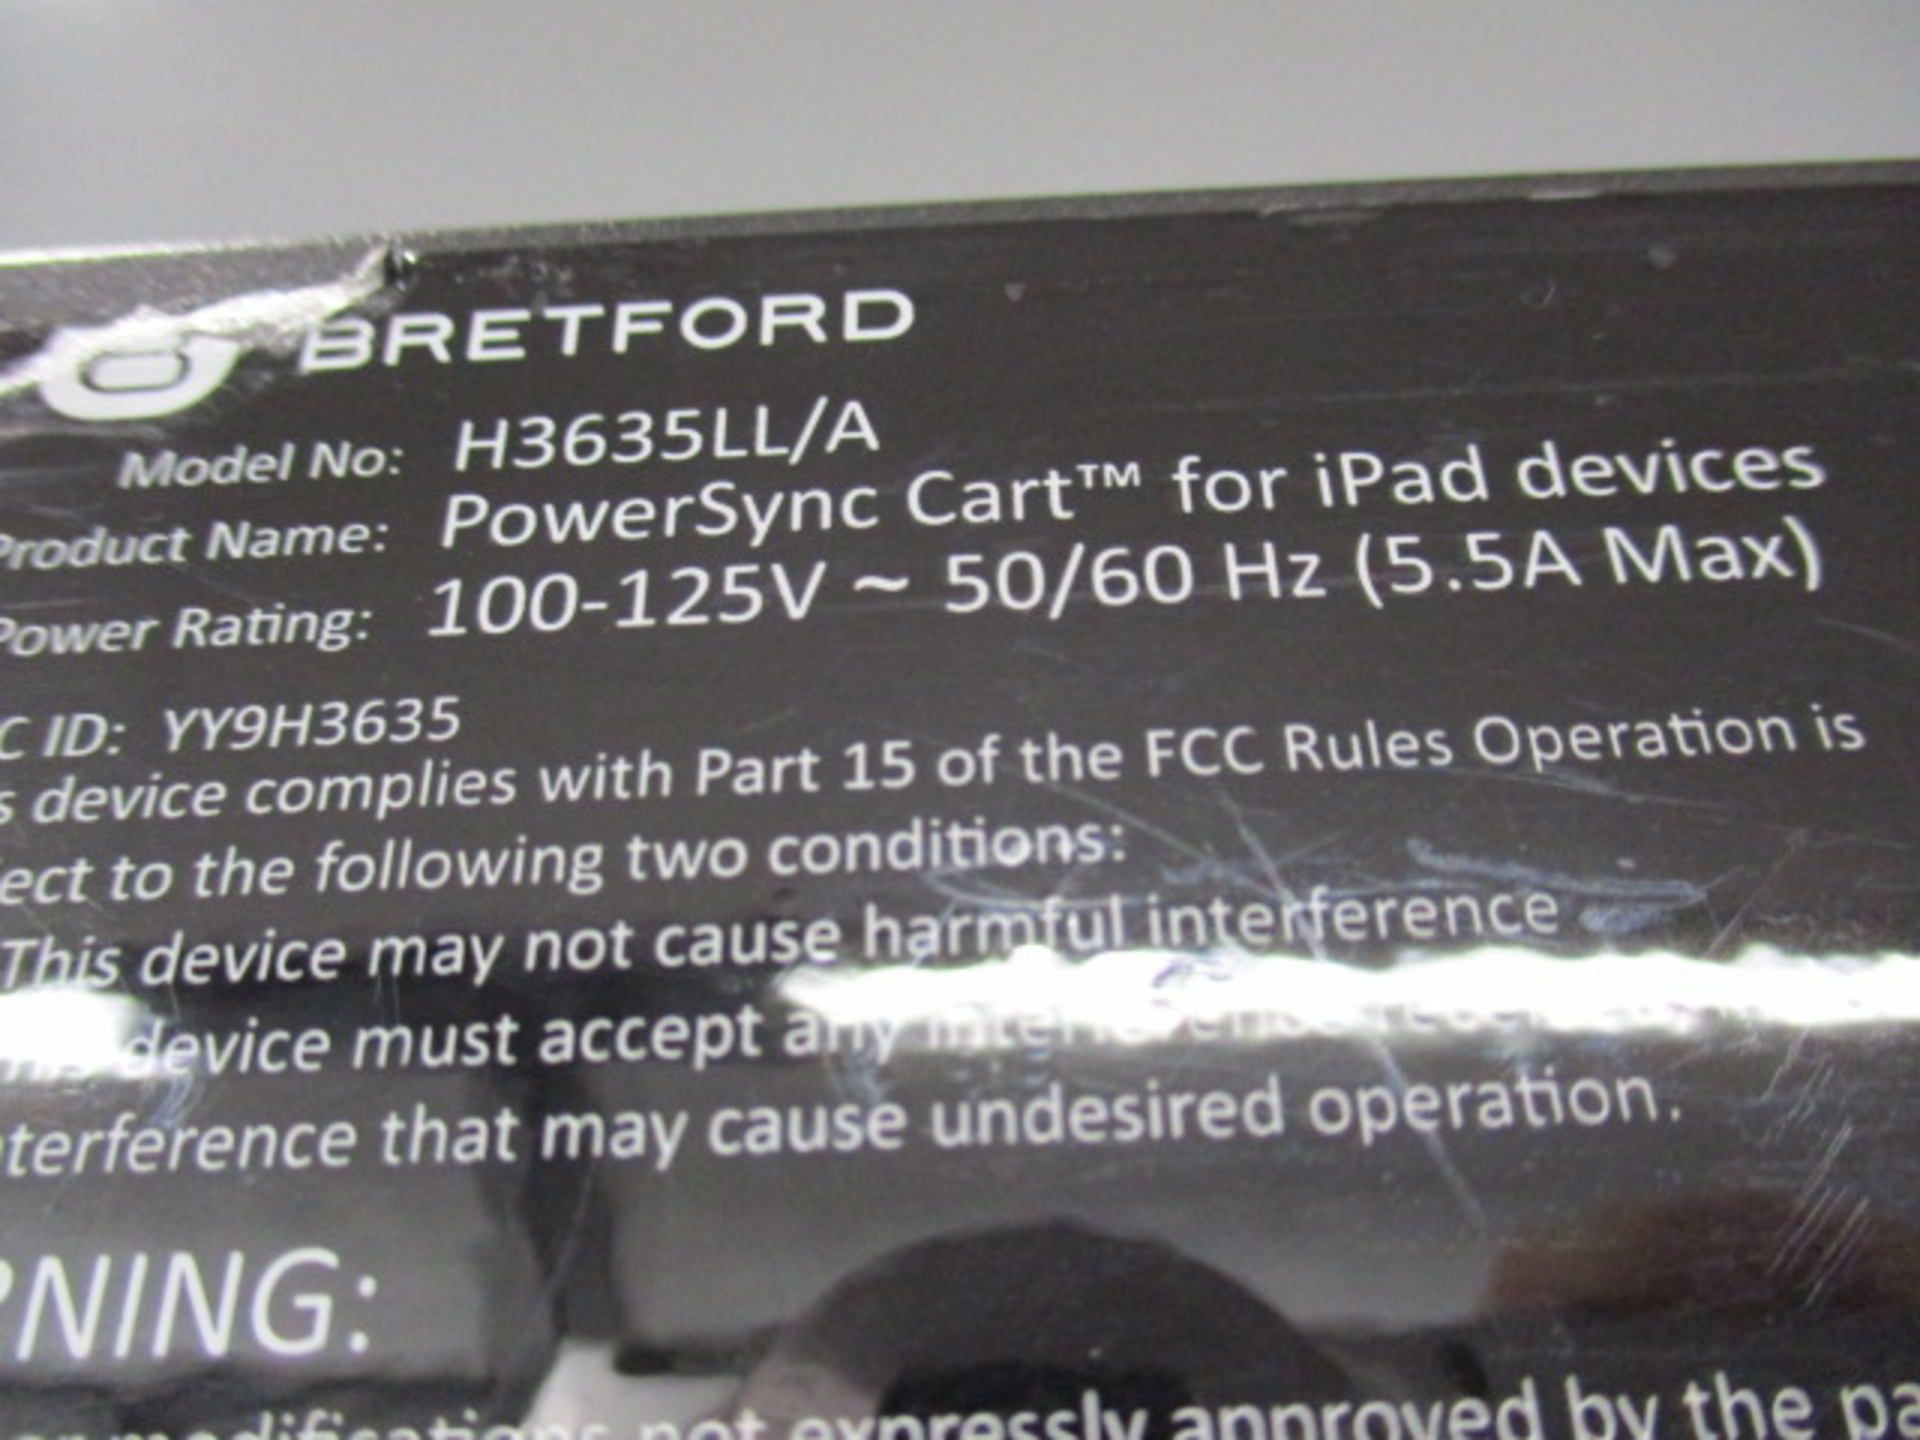 (4) Bretford H3635u/A Powersync Cart for ipad devices, Mobile - Image 11 of 11